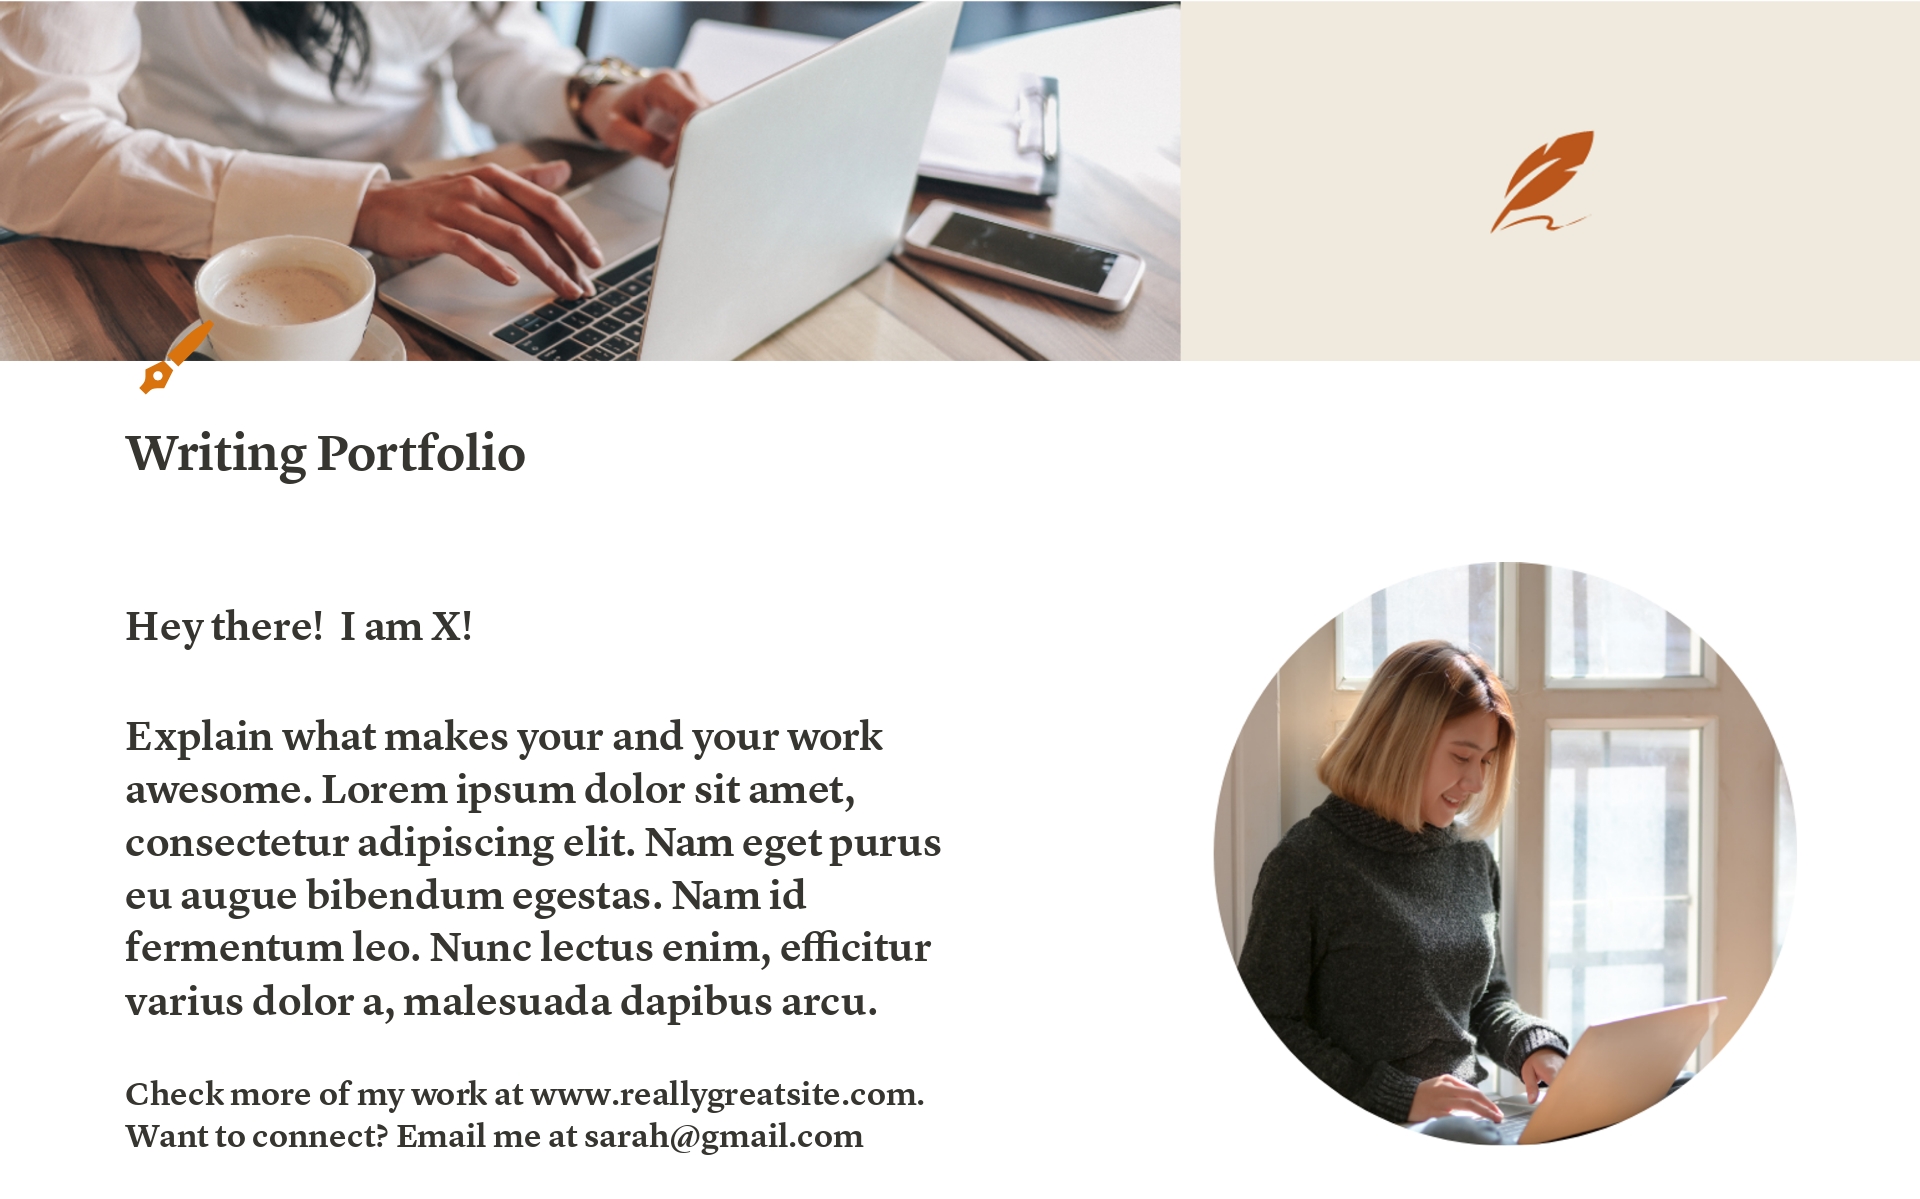 Perfect for content writers, copywriters and bloggers, this template is a straightforward portfolio to show your written work